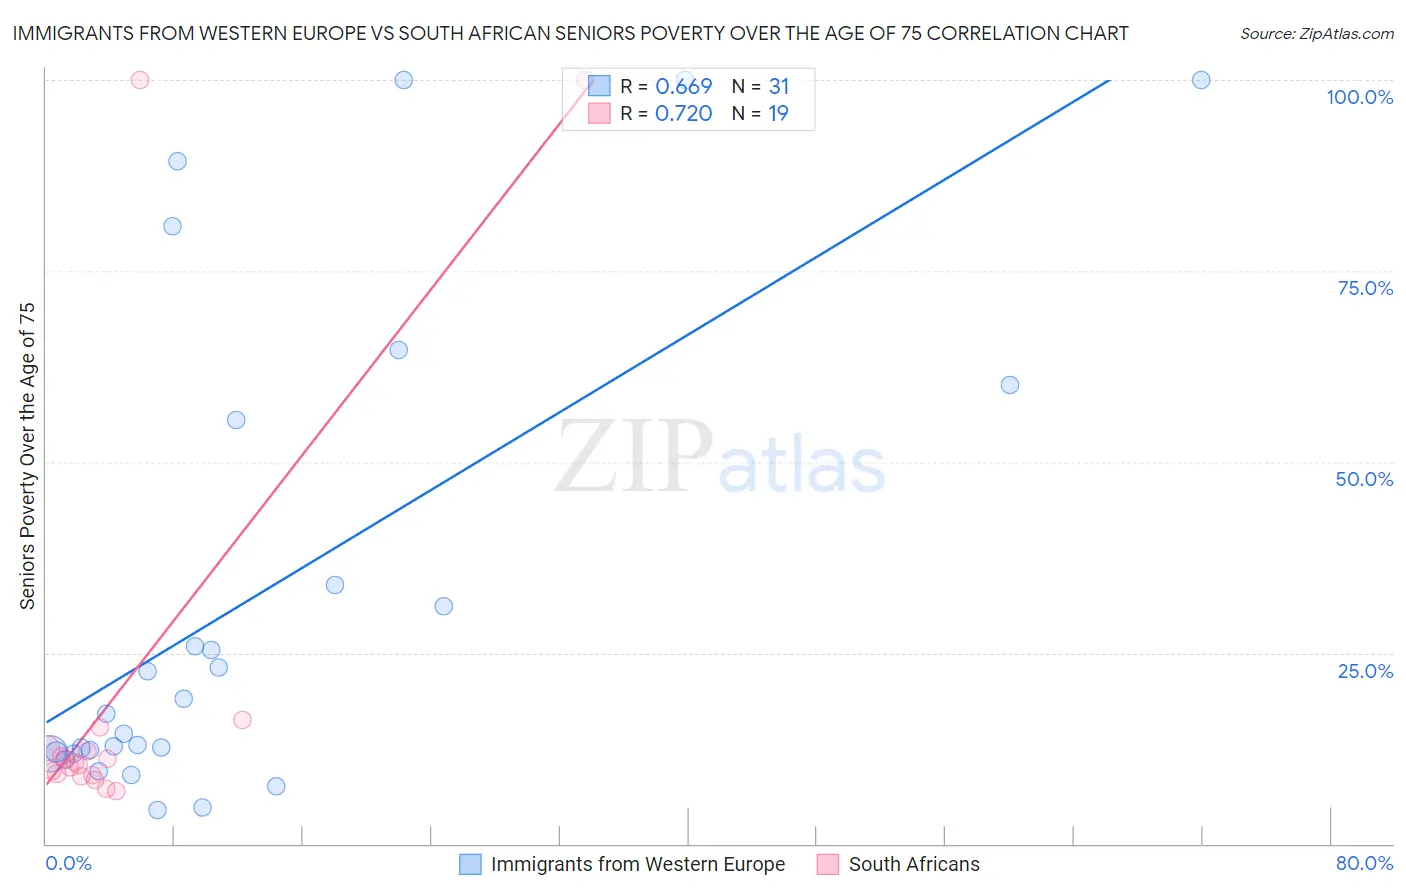 Immigrants from Western Europe vs South African Seniors Poverty Over the Age of 75